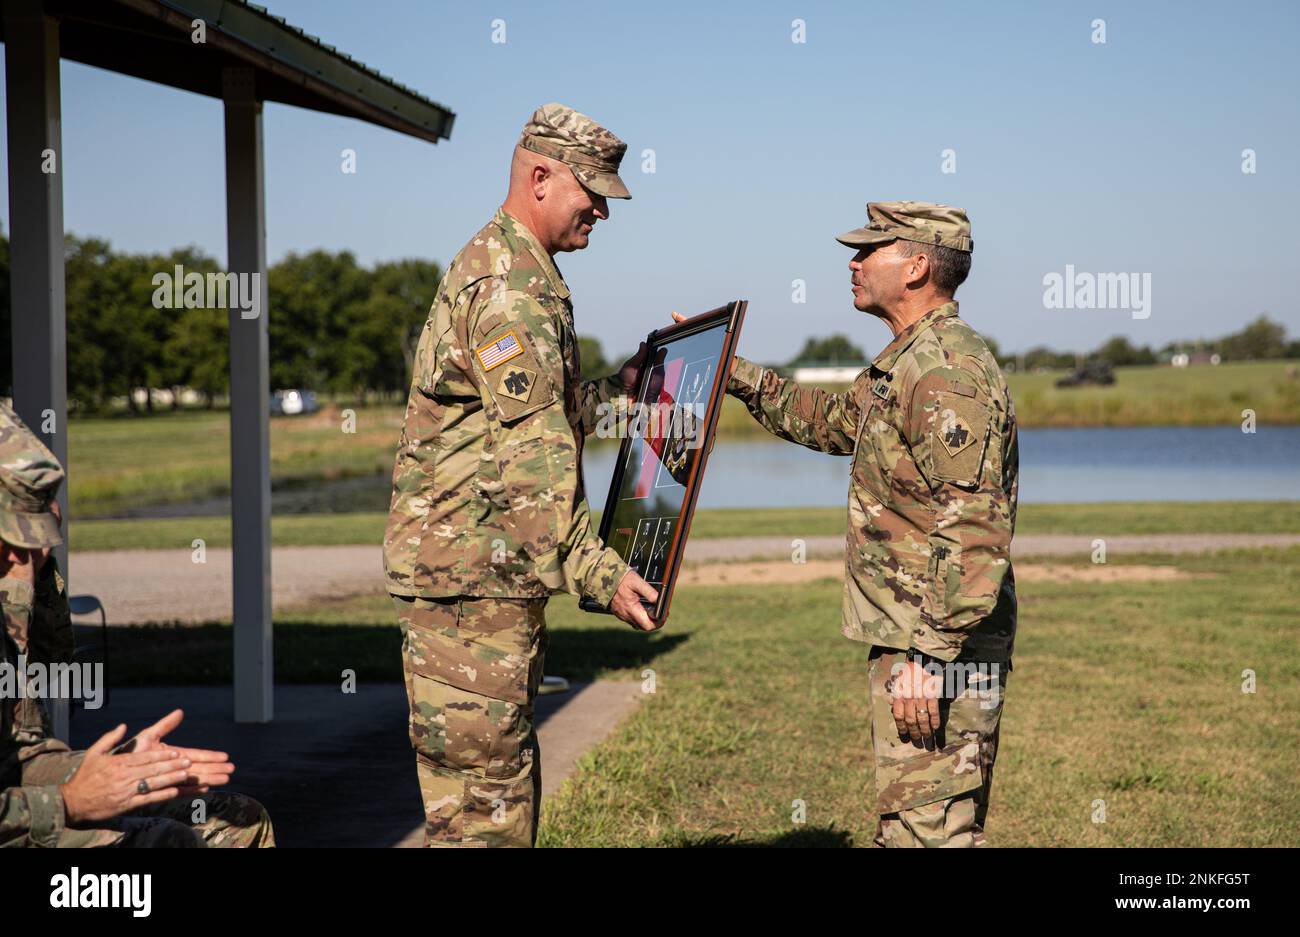 Command Sgt. Maj. Chris Murray presents Col. Colby Wyatt, outgoing commander of the 45th Infantry Brigade Combat Team, Oklahoma National Guard, with the Meritorious Service Medal during a change of command ceremony, Camp Gruber Training Center, Okla., Aug. 14, 2022. Wyatt served as the commander of the 45th IBCT for three years and relinquished command to Col. Andrew Ballenger. (Oklahoma Army National Guard photo by Spc. Danielle Rayon) Stock Photo